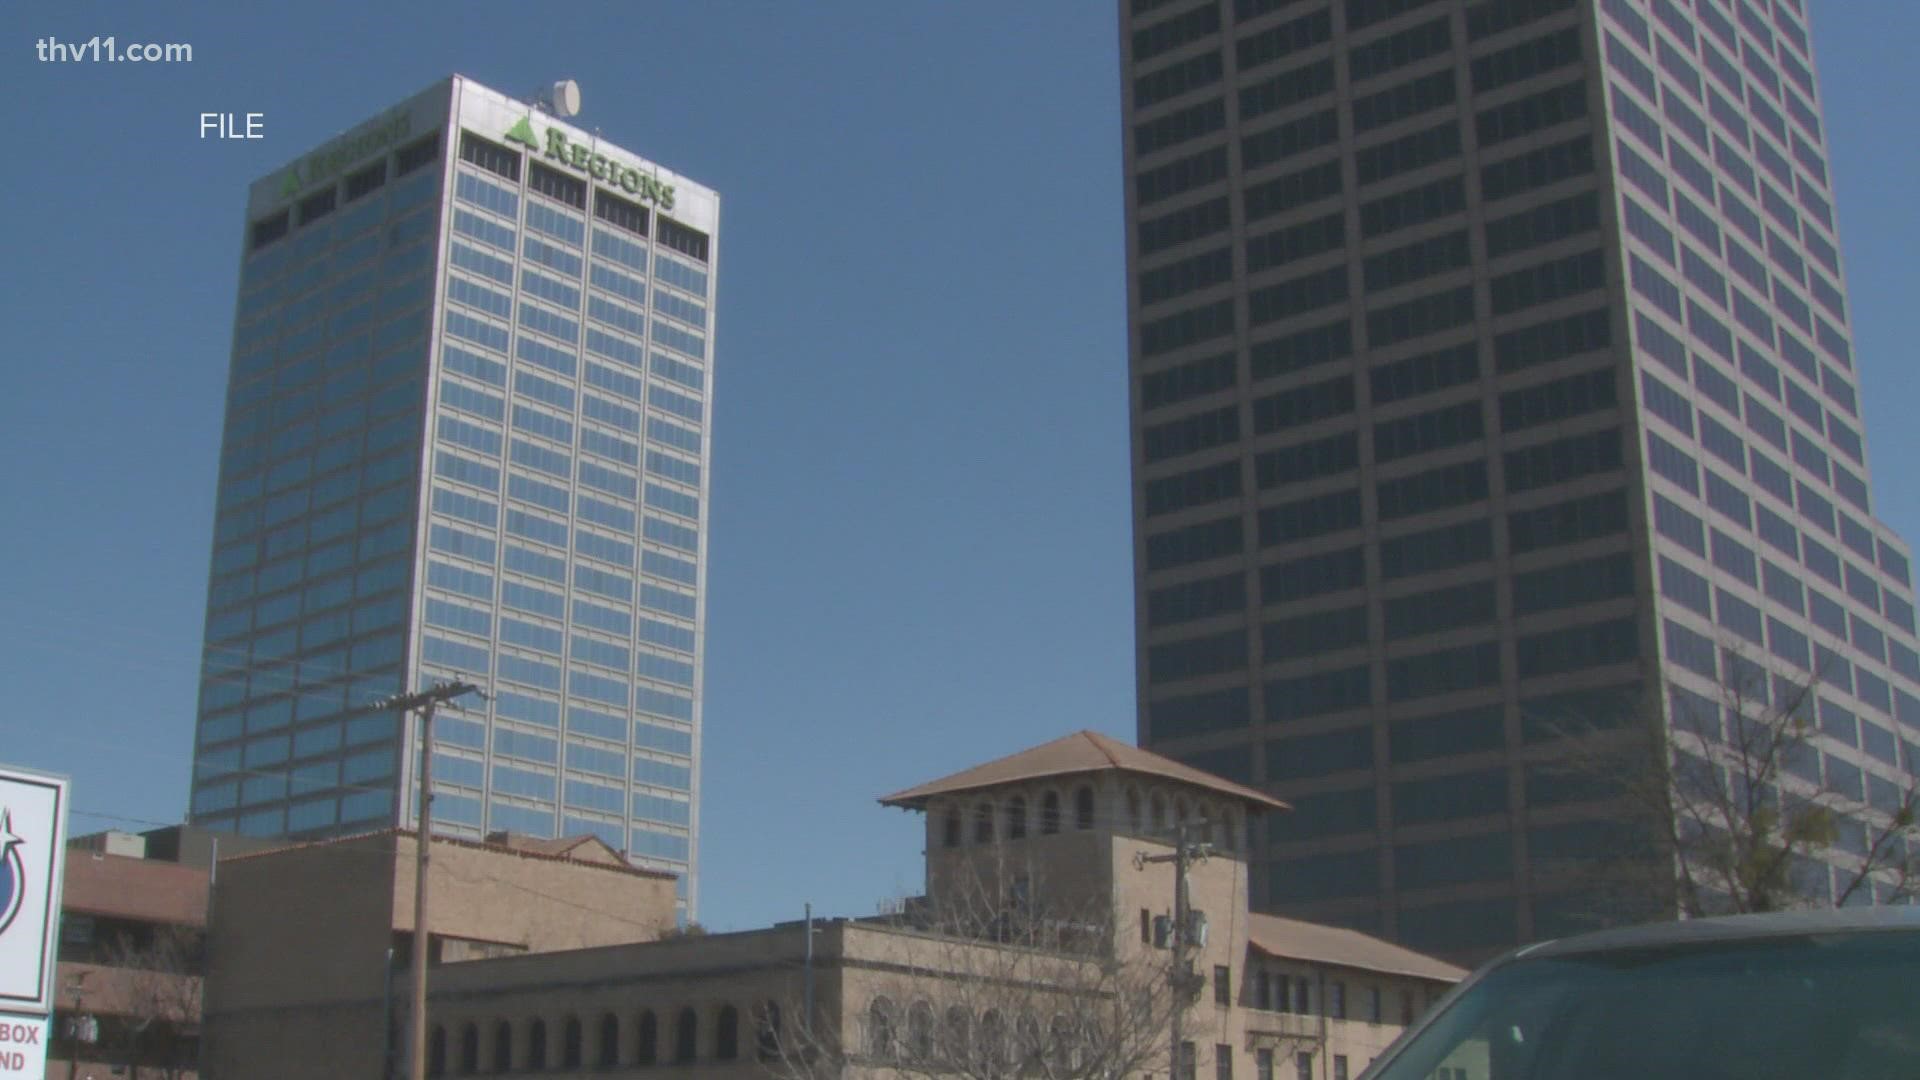 According to Arkansas Business, the 30-story Regions Center in downtown Little Rock will soon hit the market.